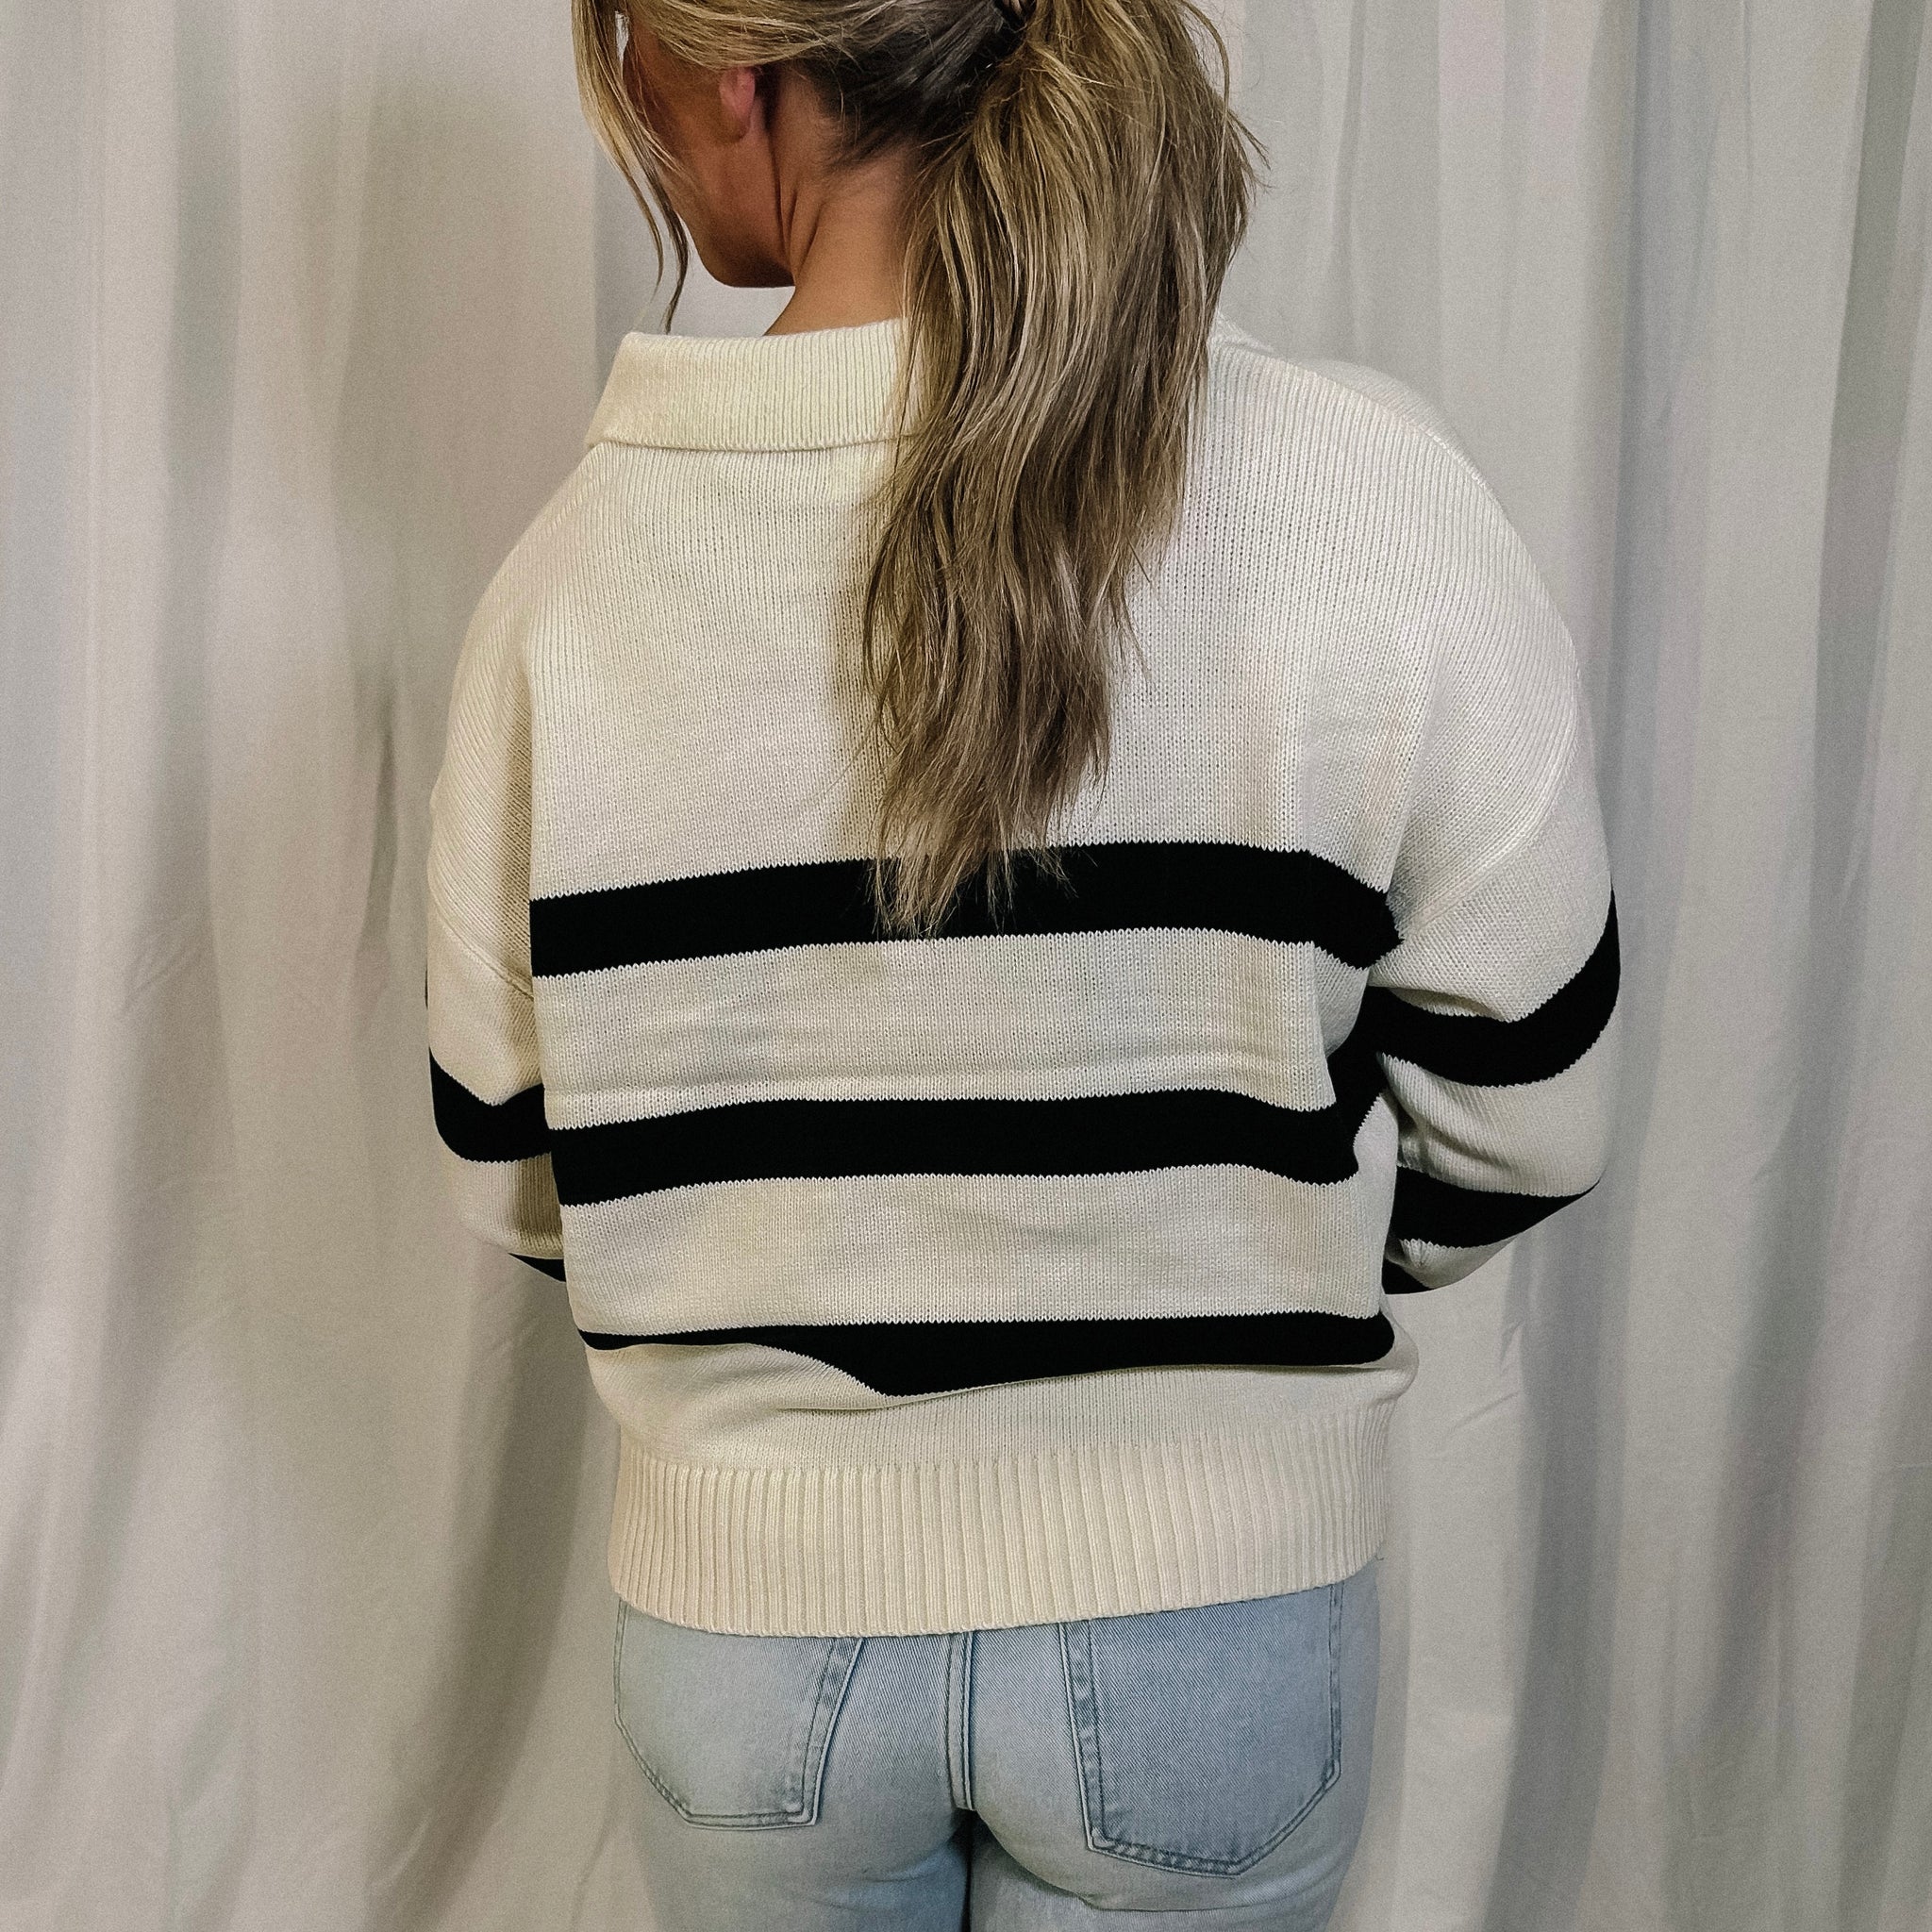 Ivy League Collared Sweater - LAST ONE